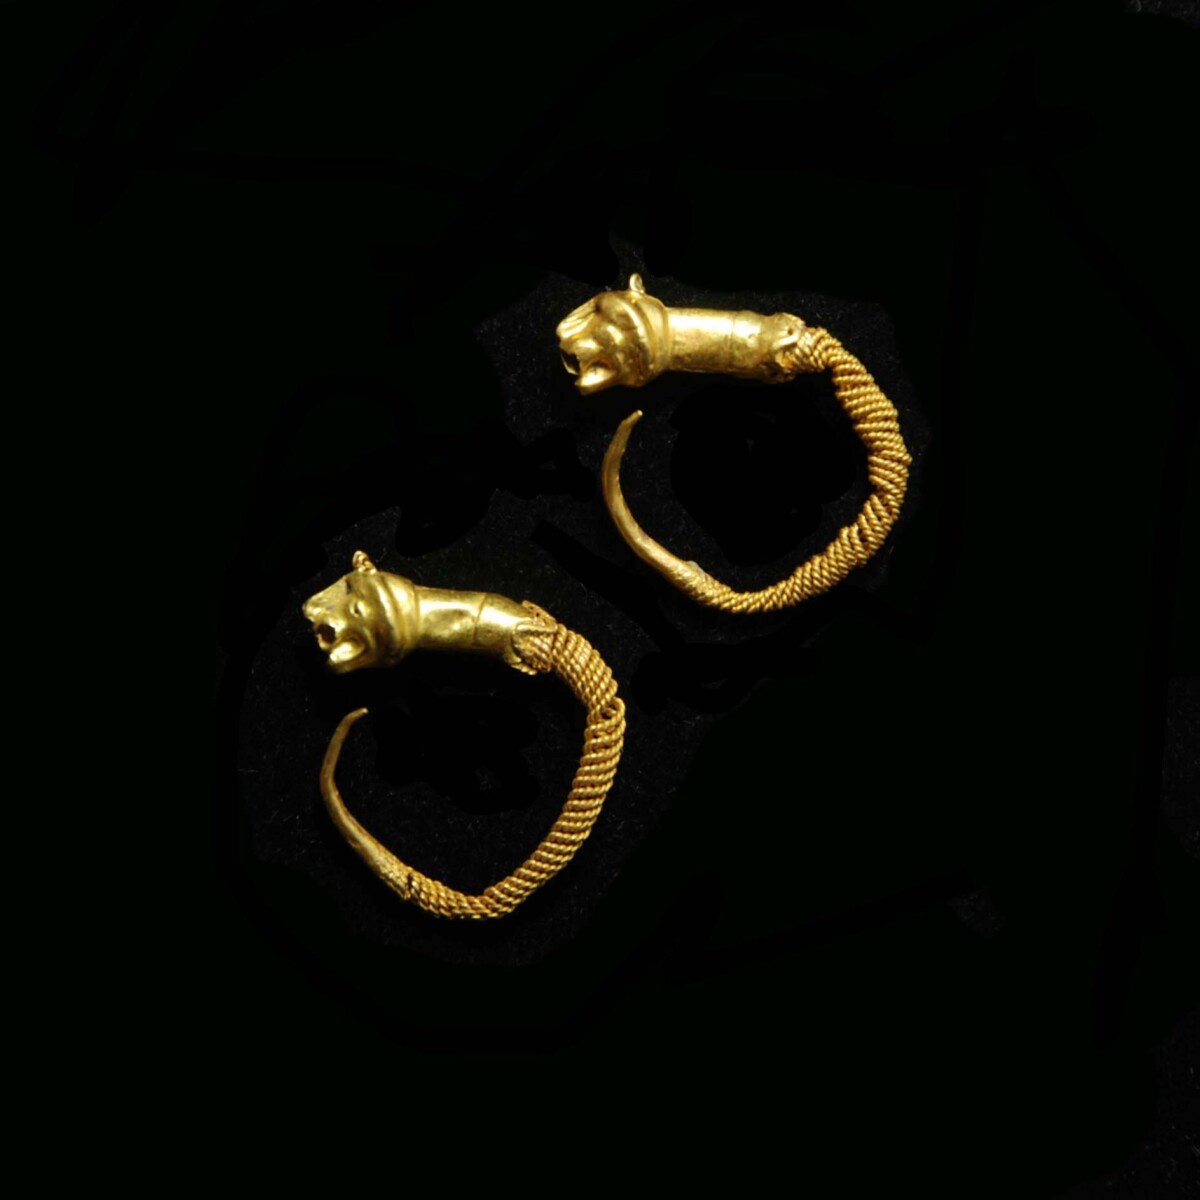 Greek hellenistic gold earrings with lion heads